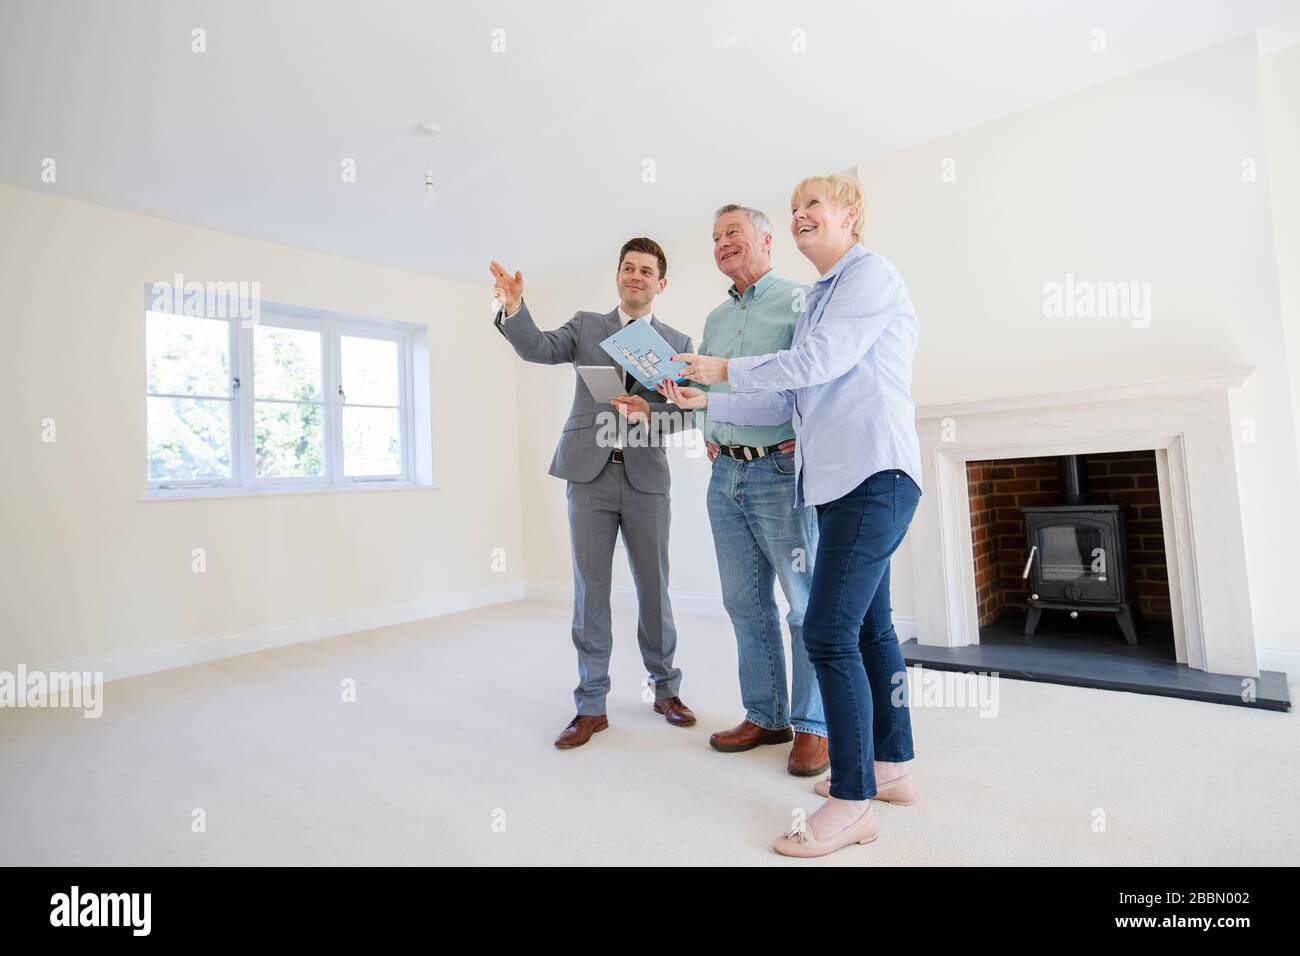 Realtor With Digital Tablet Showing Senior Couple Looking To Downsize Around Retirement Home Stock Photo